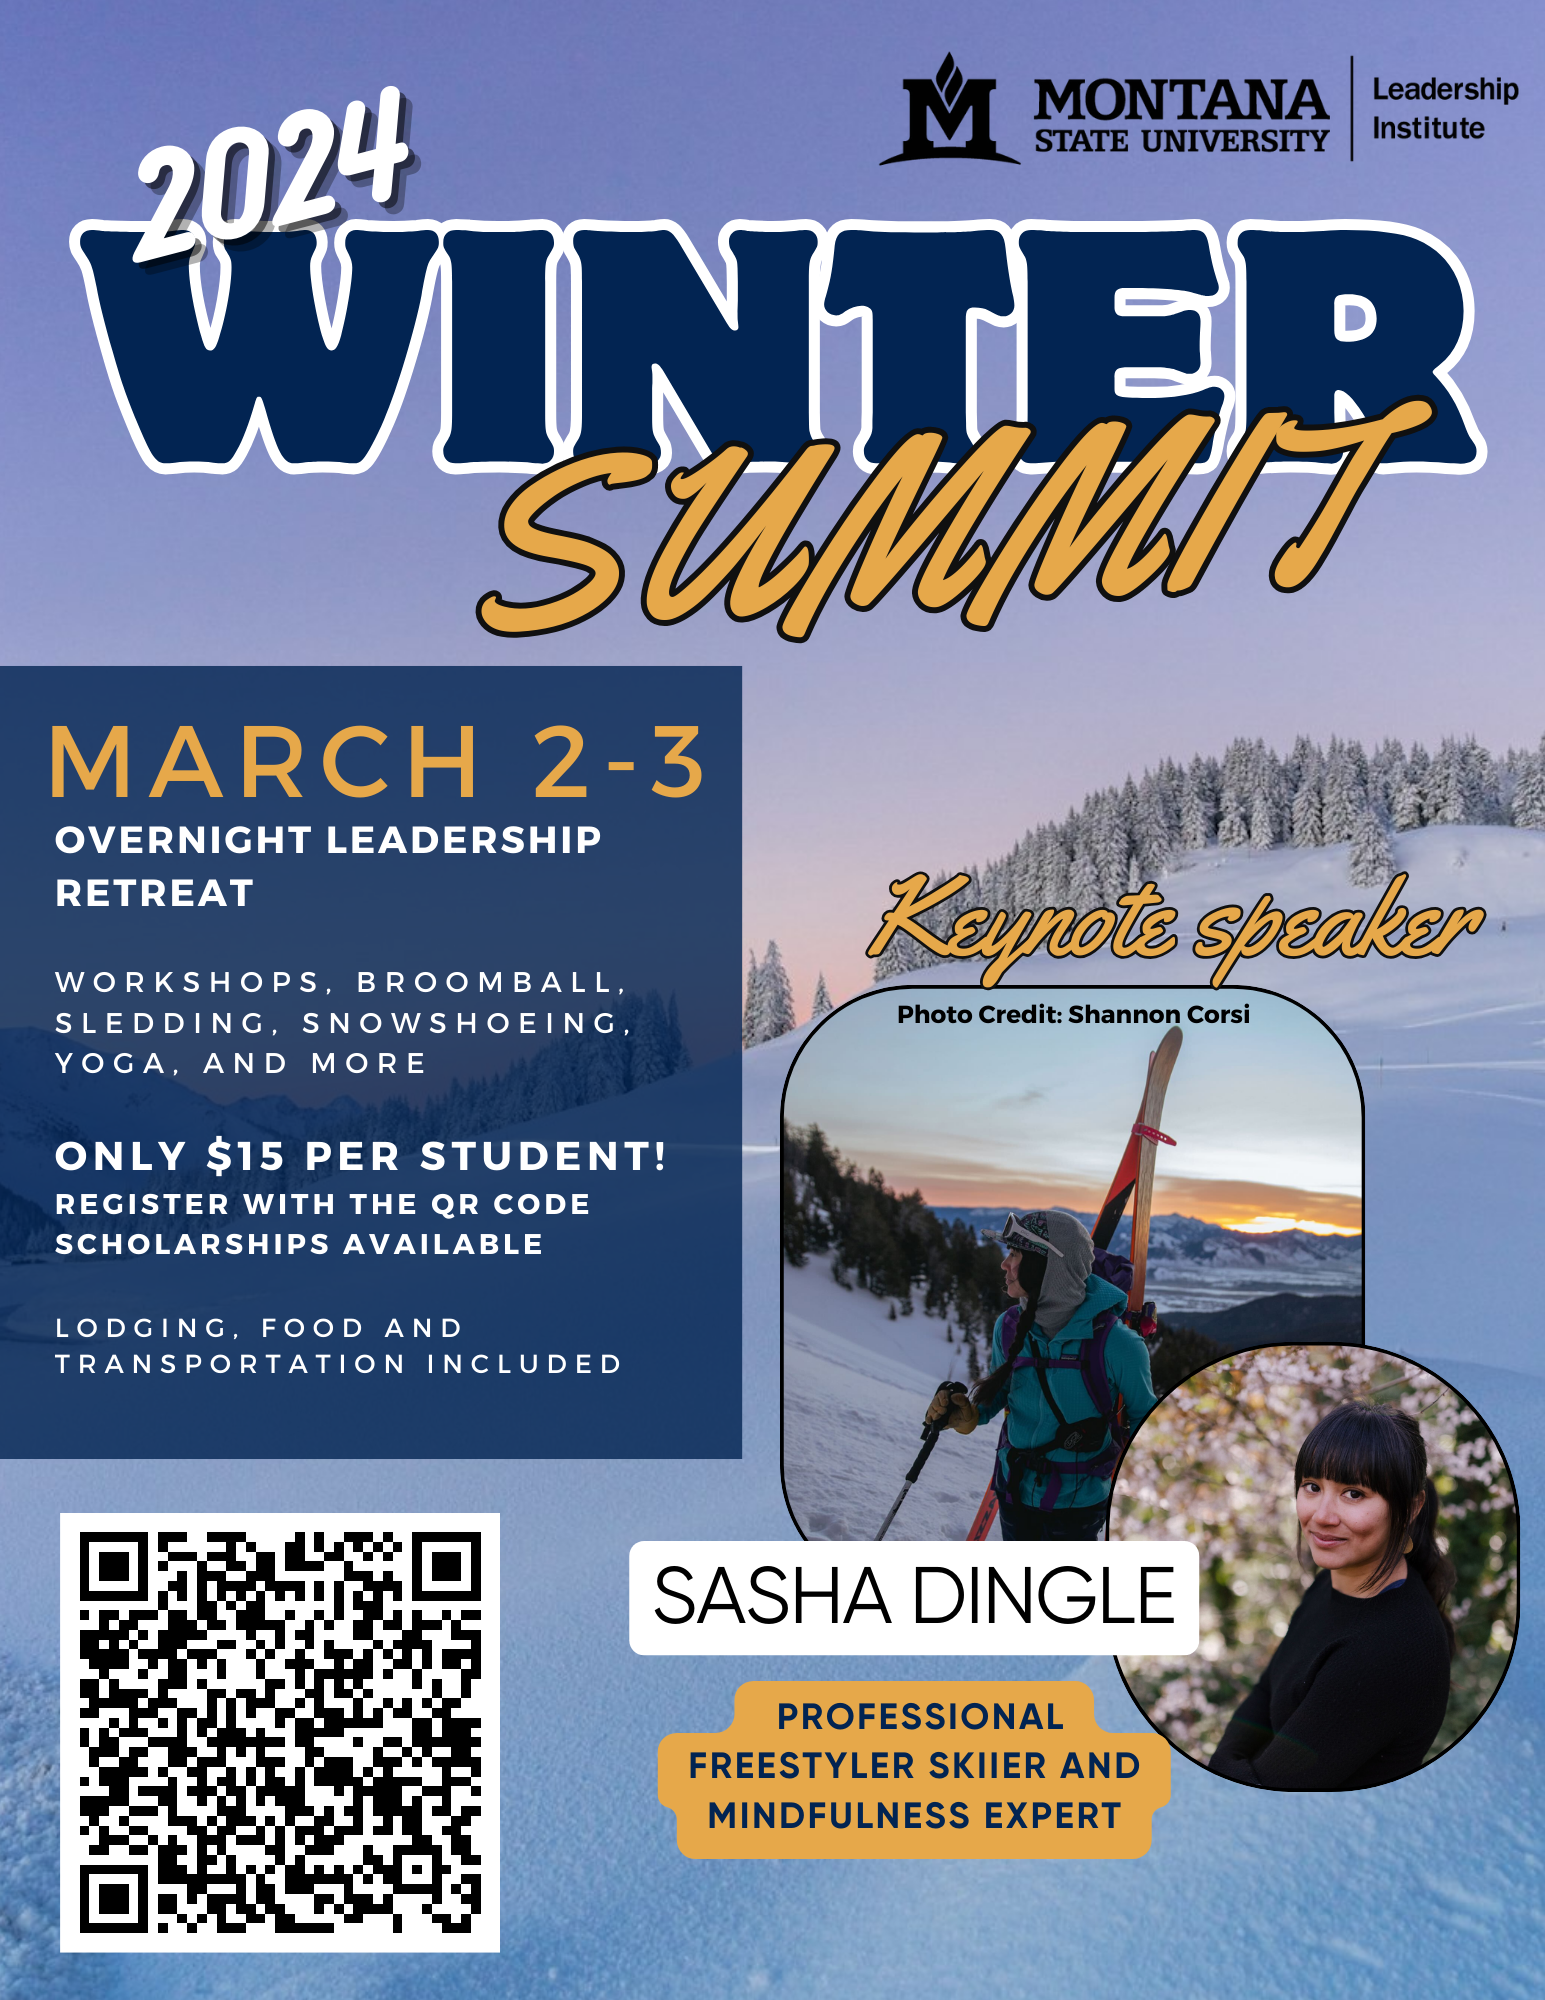 WinterSummitRetreat to be held on March 2nd and 3rd